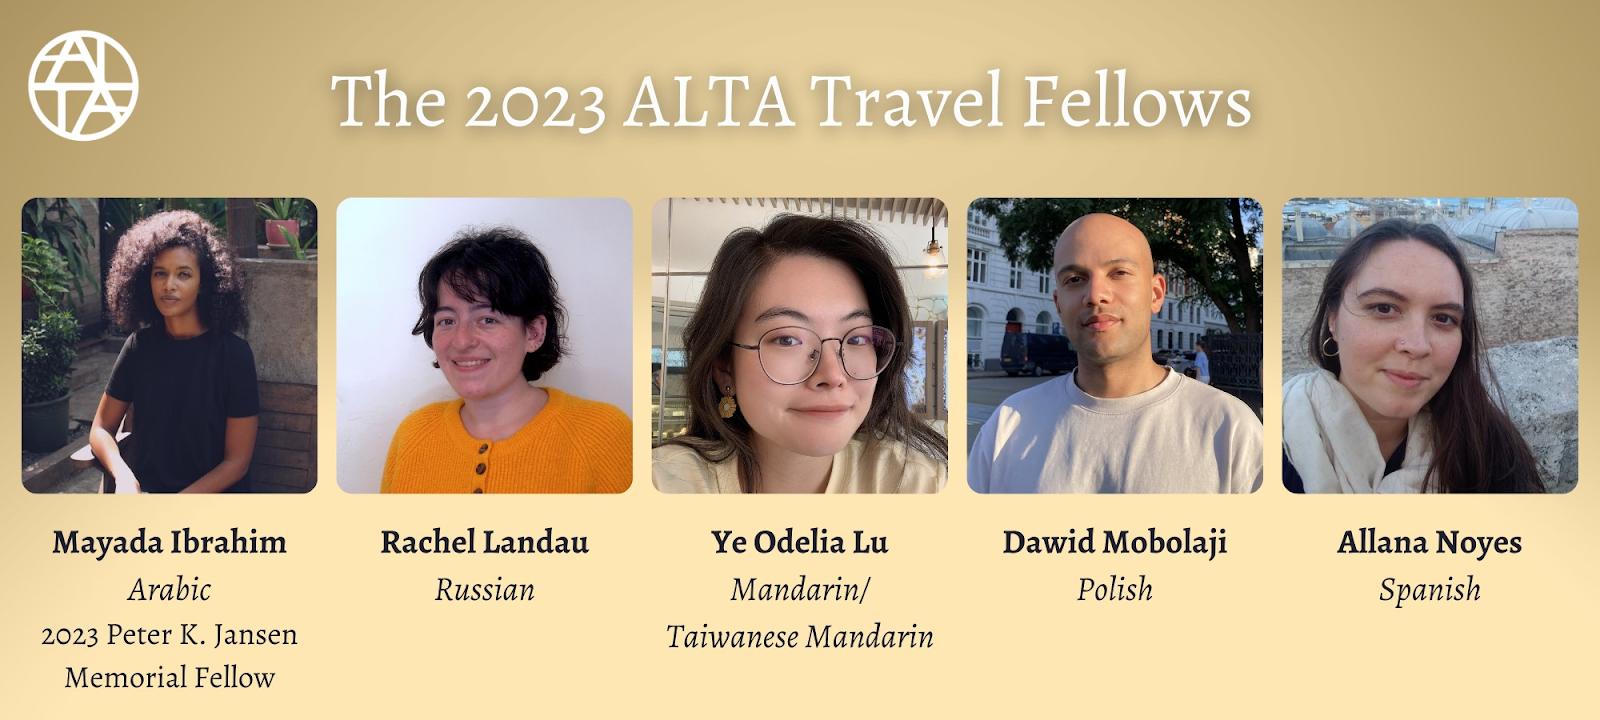 A banner image with the headshots of the 2023 ALTA Travel Fellows.